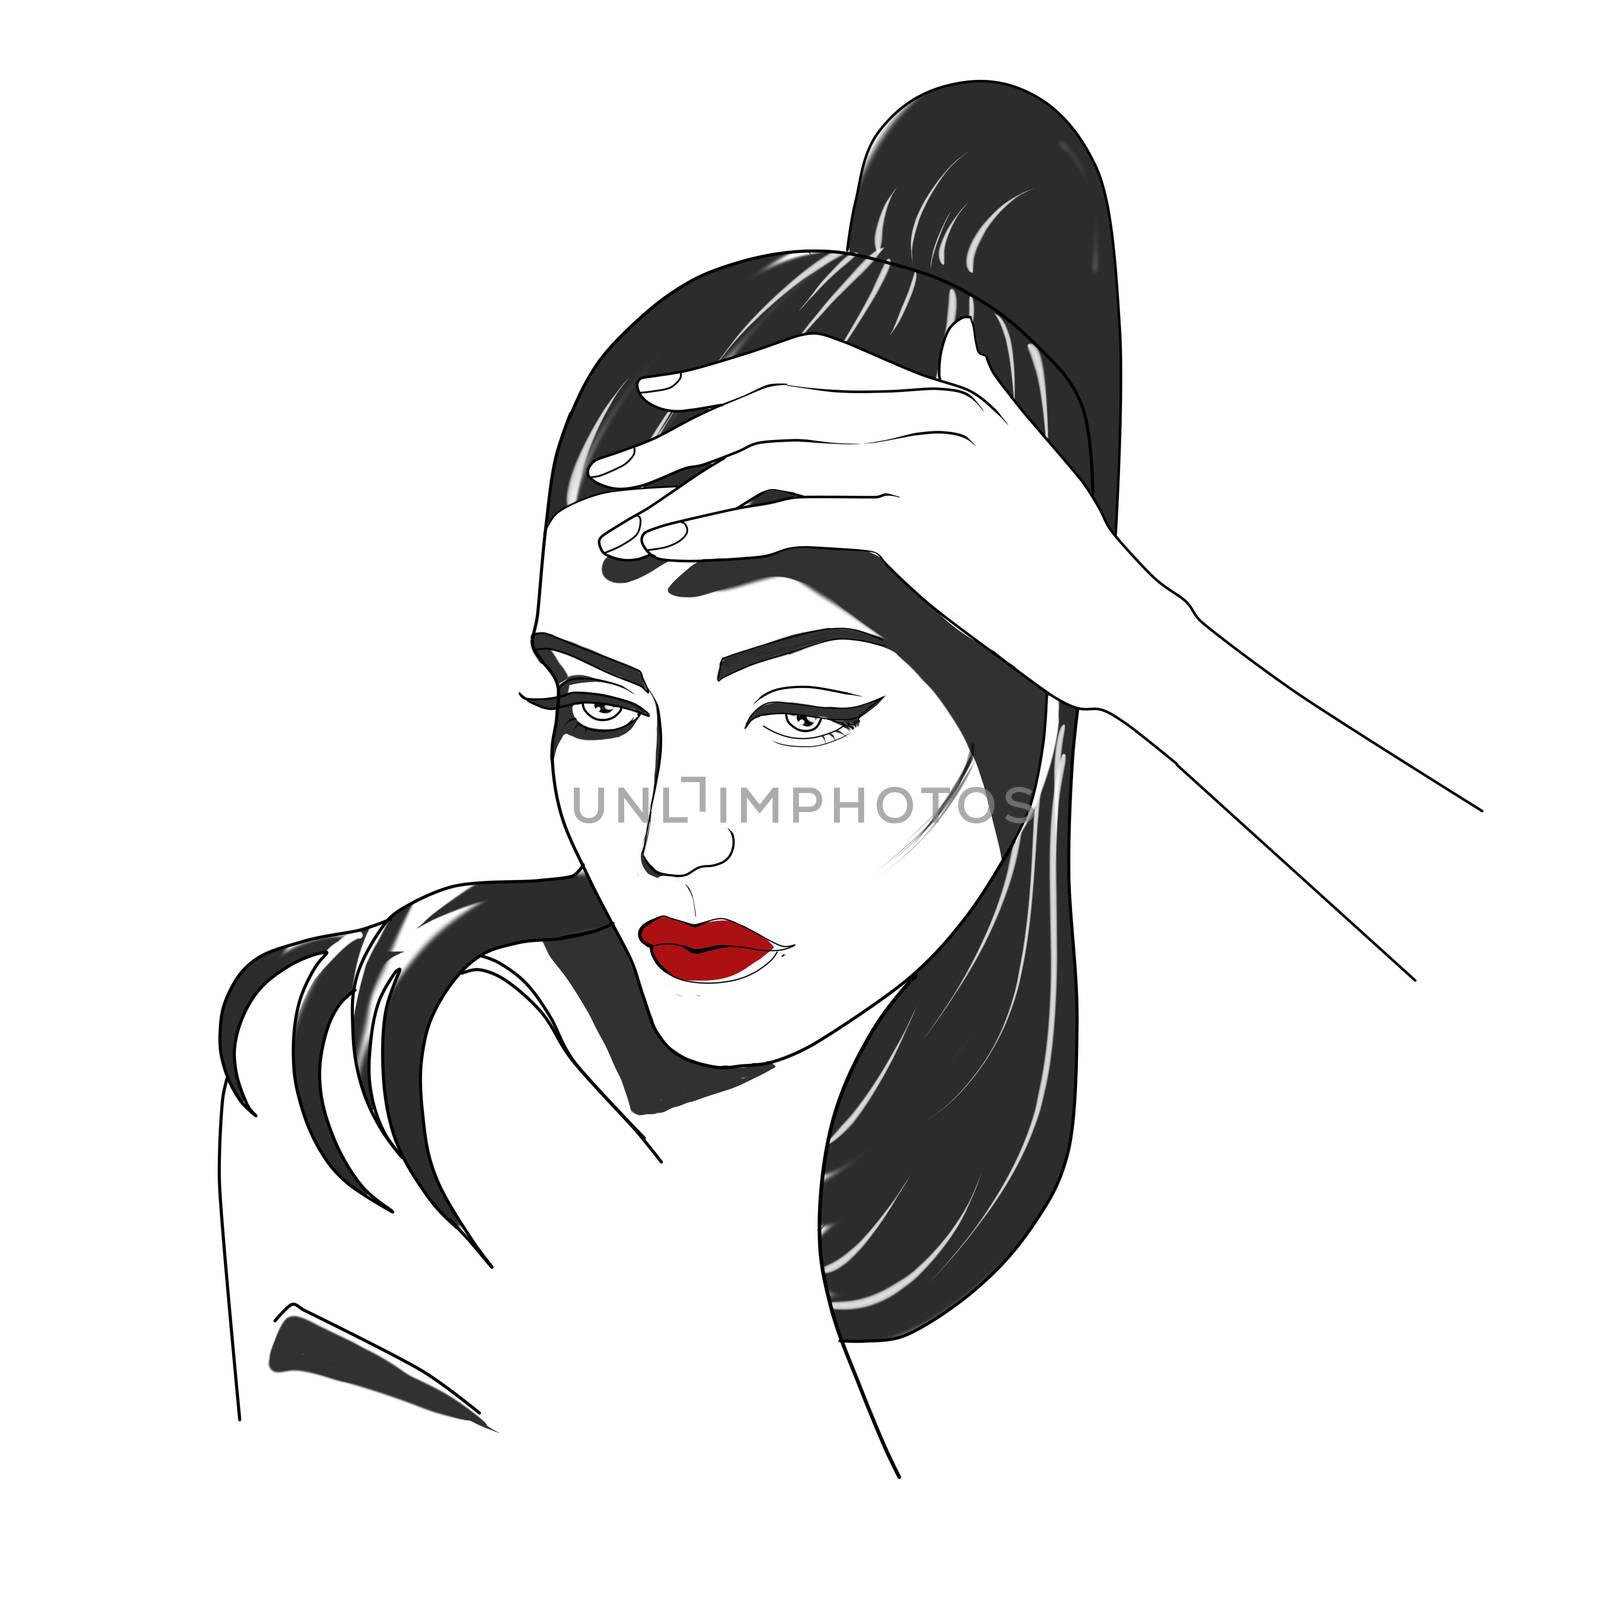 Fashion Illustration - Portrait of woman - Stylized portrait of woman in black and white by GGillustrations